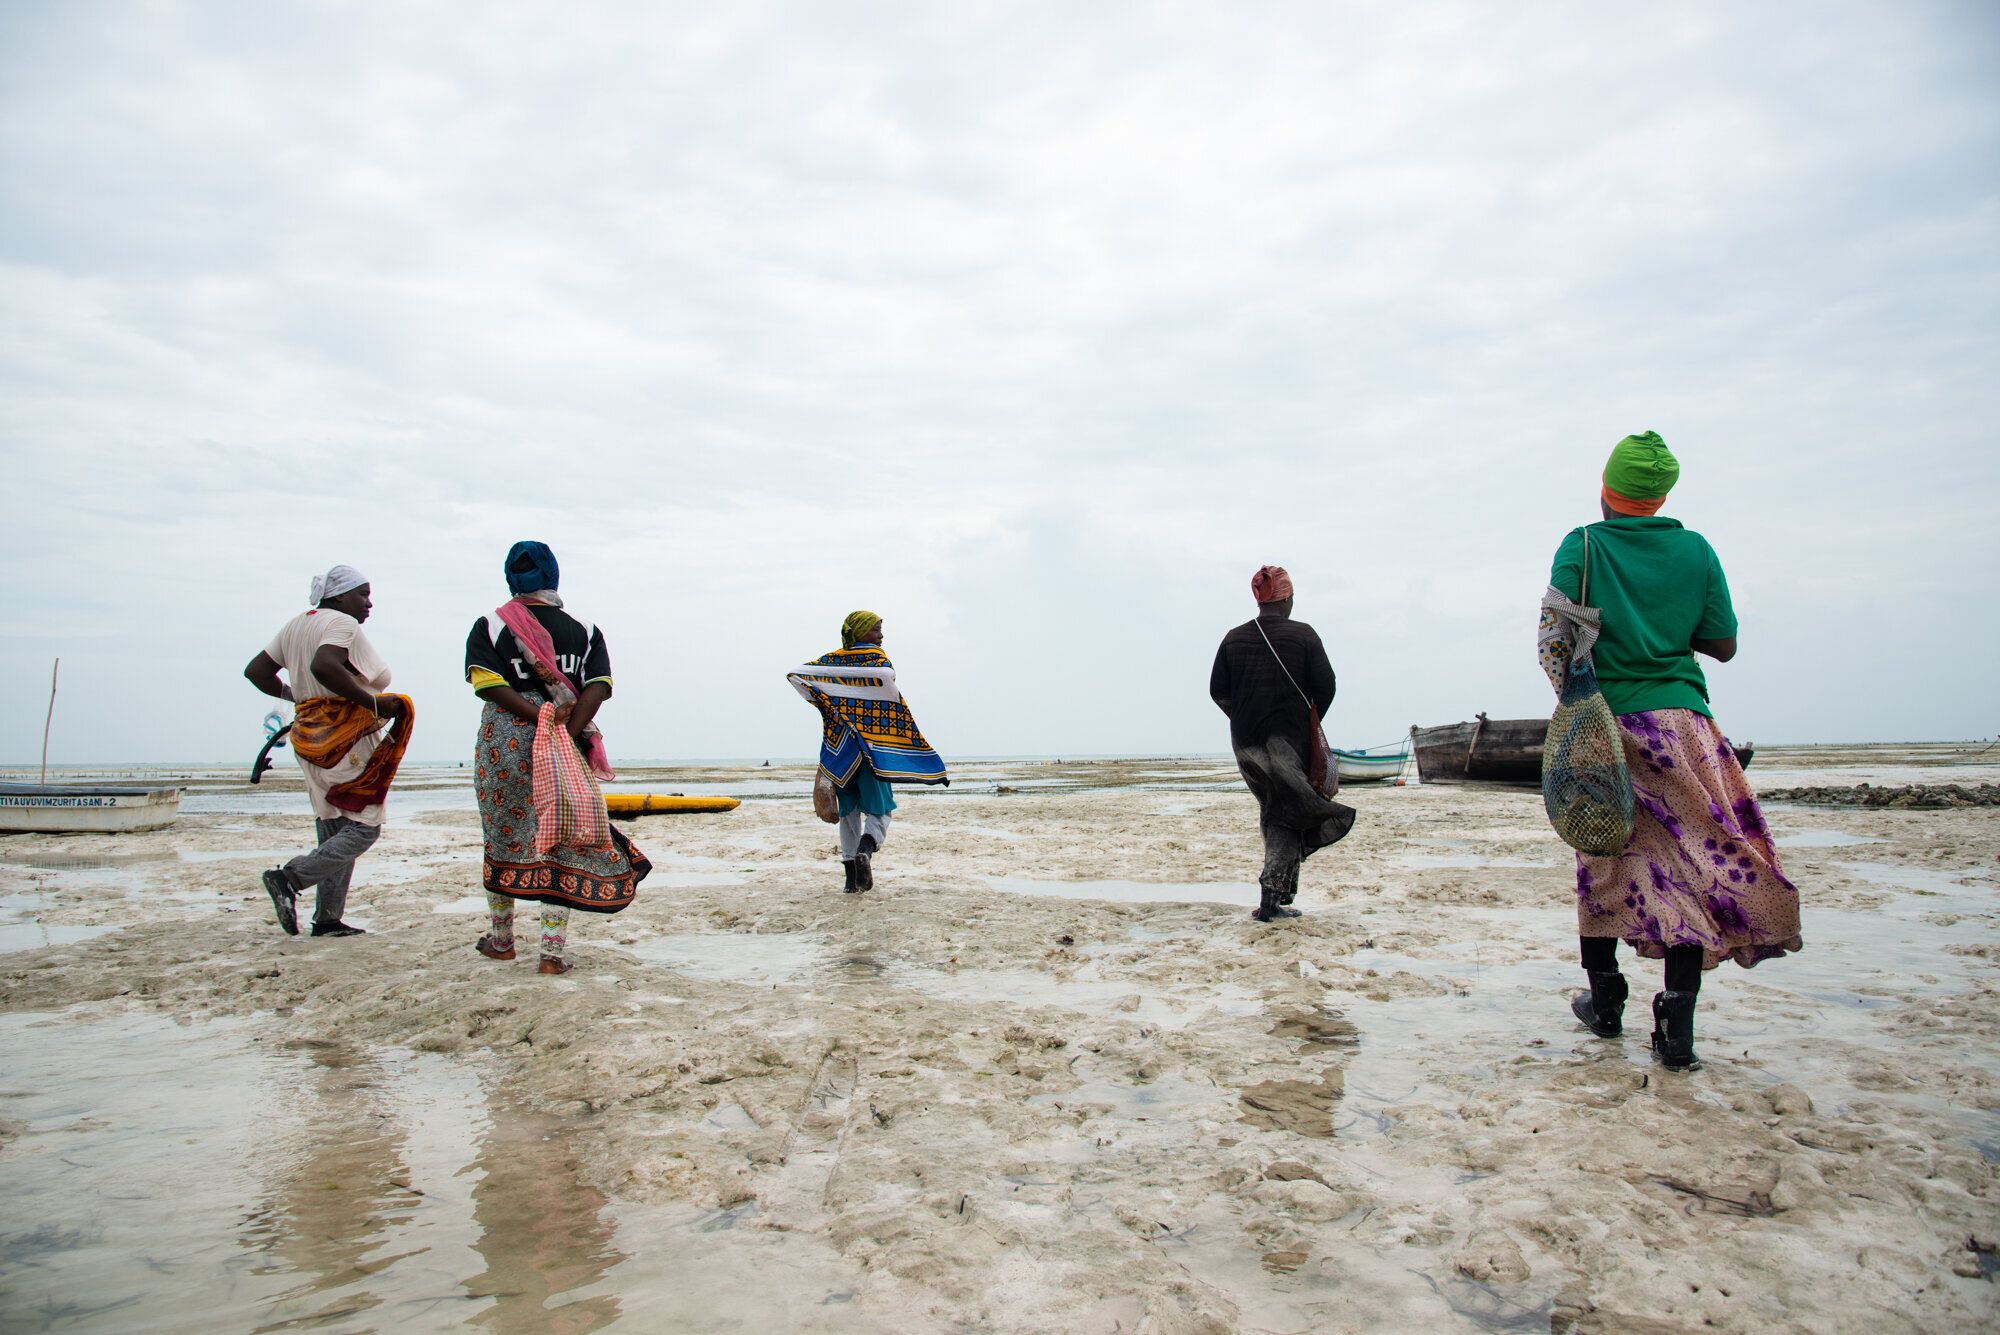 The sponge farmers walk to their farms at low tide. The women have only a few hours to work before the tide is too high.